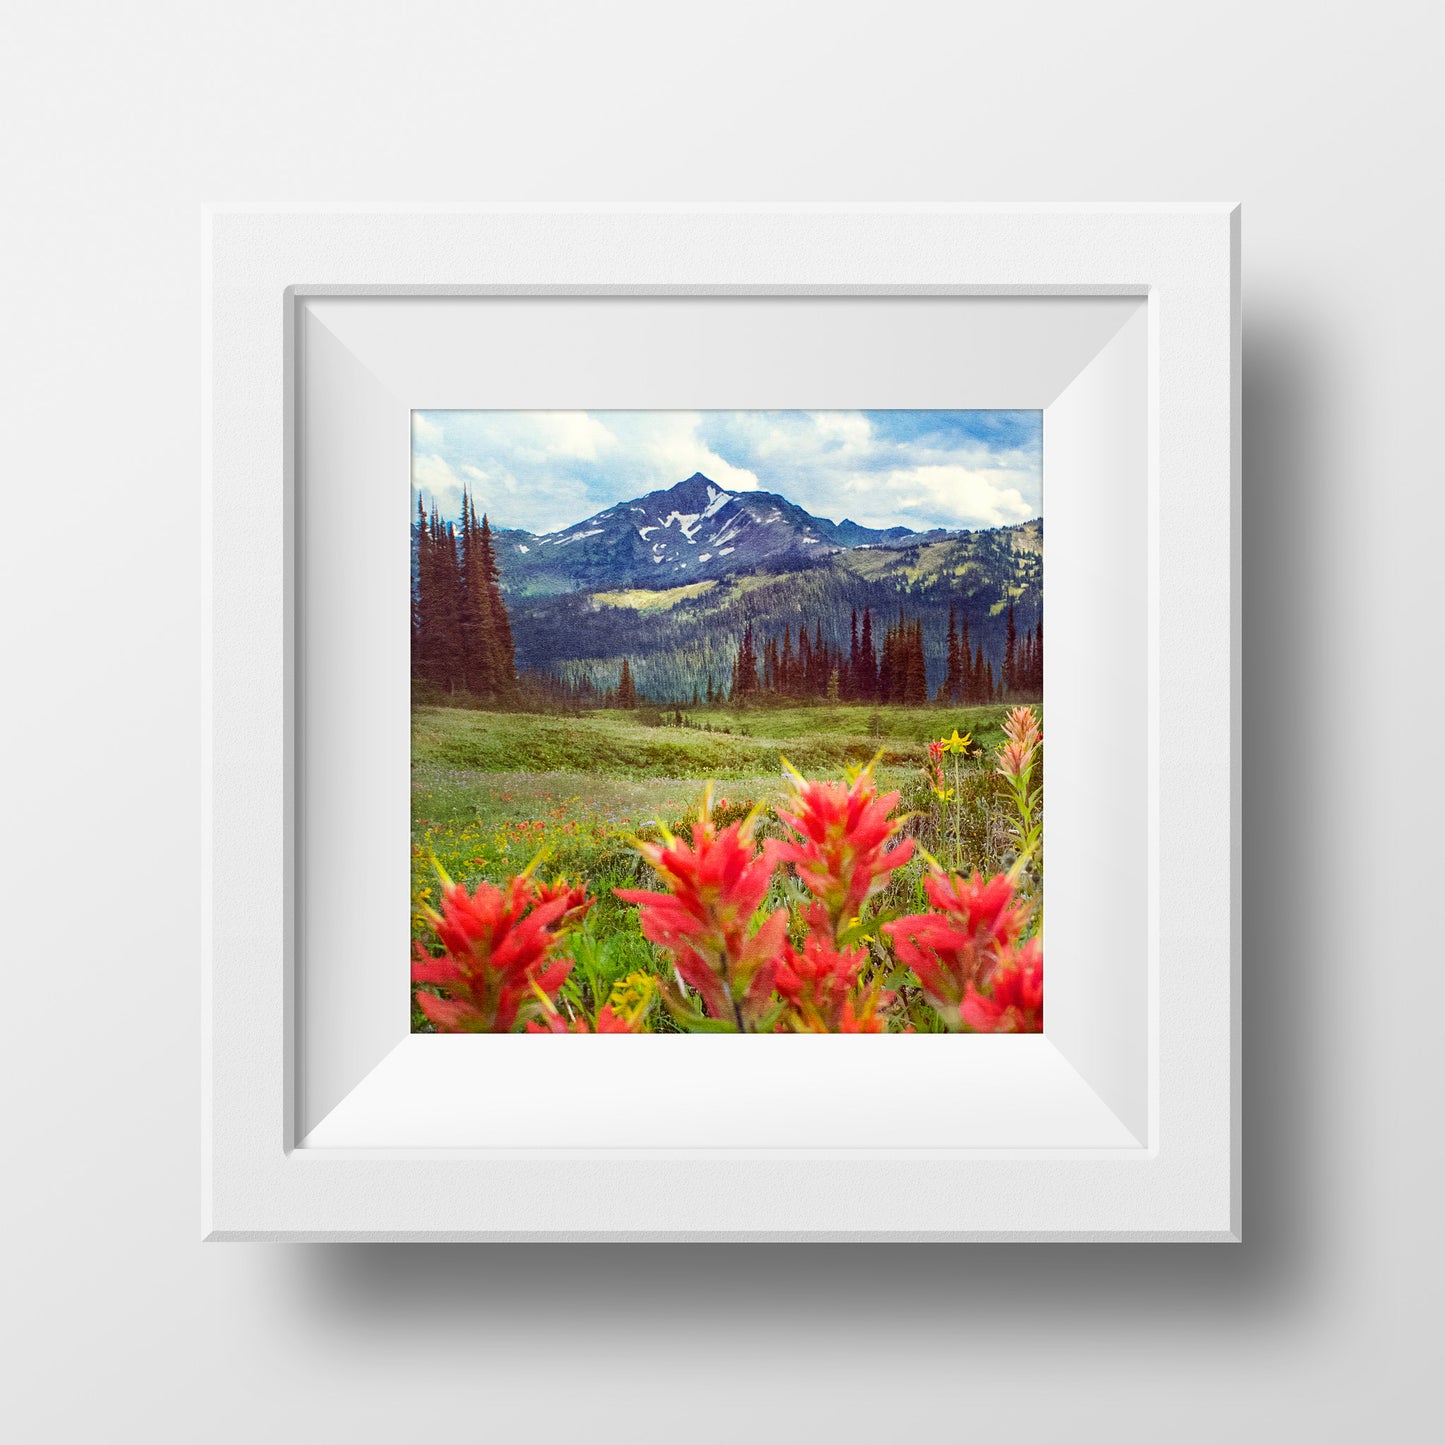 Paintbrushes + Meadows <br>Wildflowers in B.C<br>Archival Fine Art Chromogenic Print